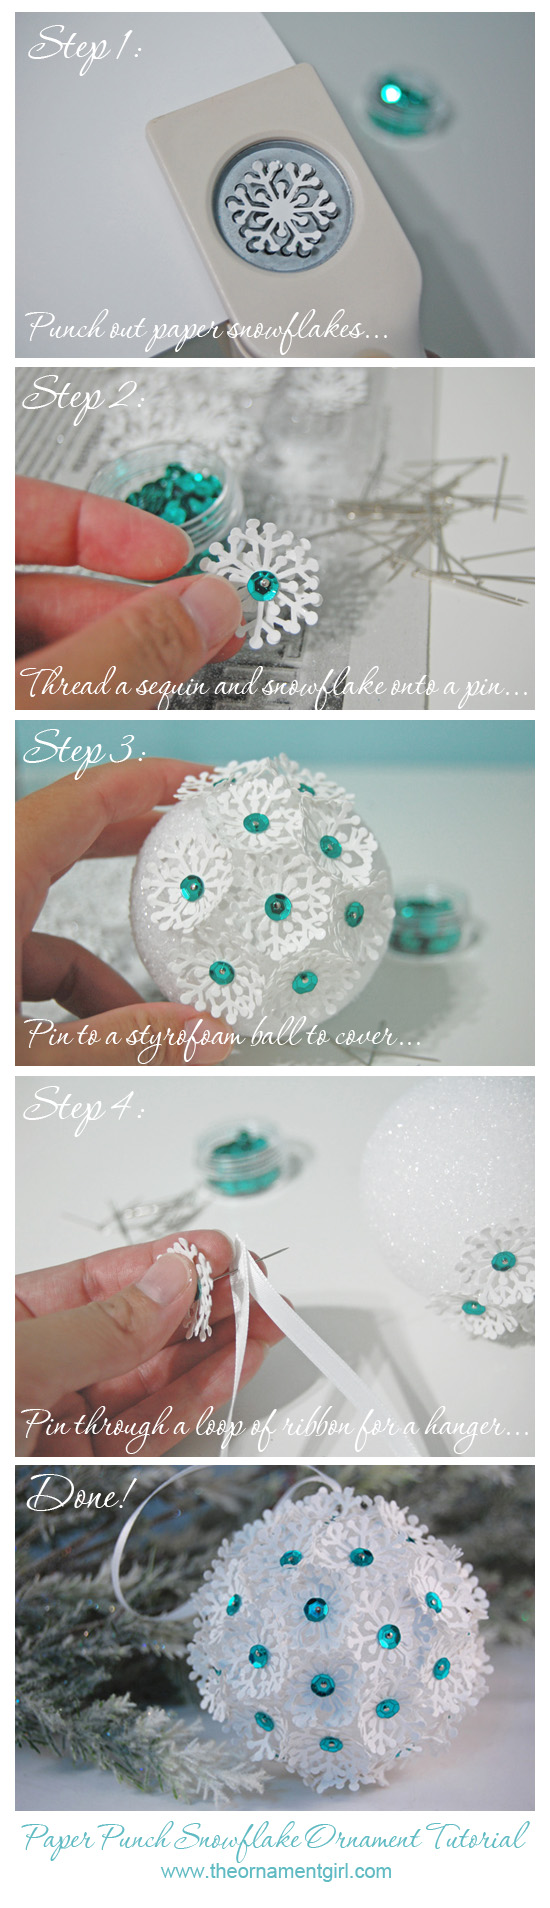 paper punch snowflake christmas ornament tutorial